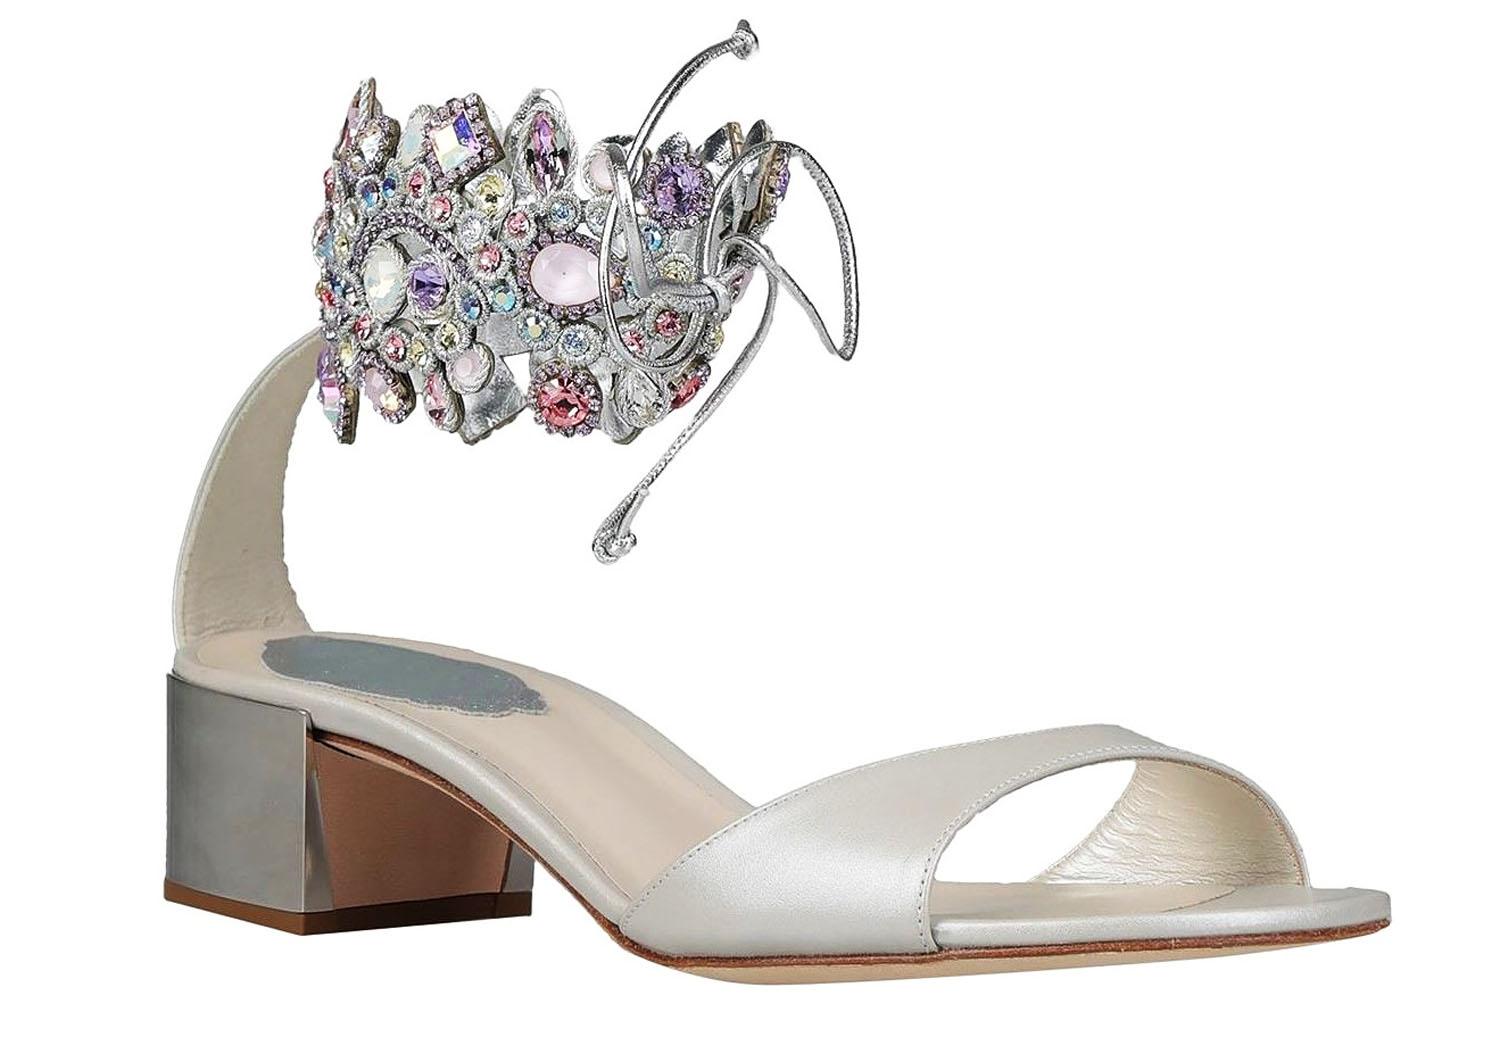 New Rene Caovilla Gray Leather Jeweled Flats Sandals
Sizes available - 36, 37, 40. ( US 6, 7, 10 )
Lamb Leather, Soft Gray Color, Ankle Jeweled Wrap, Front Tie Closure, Silver-Tone Metallic Heel - 1.5 inches.
Made in Italy.
New with box.
